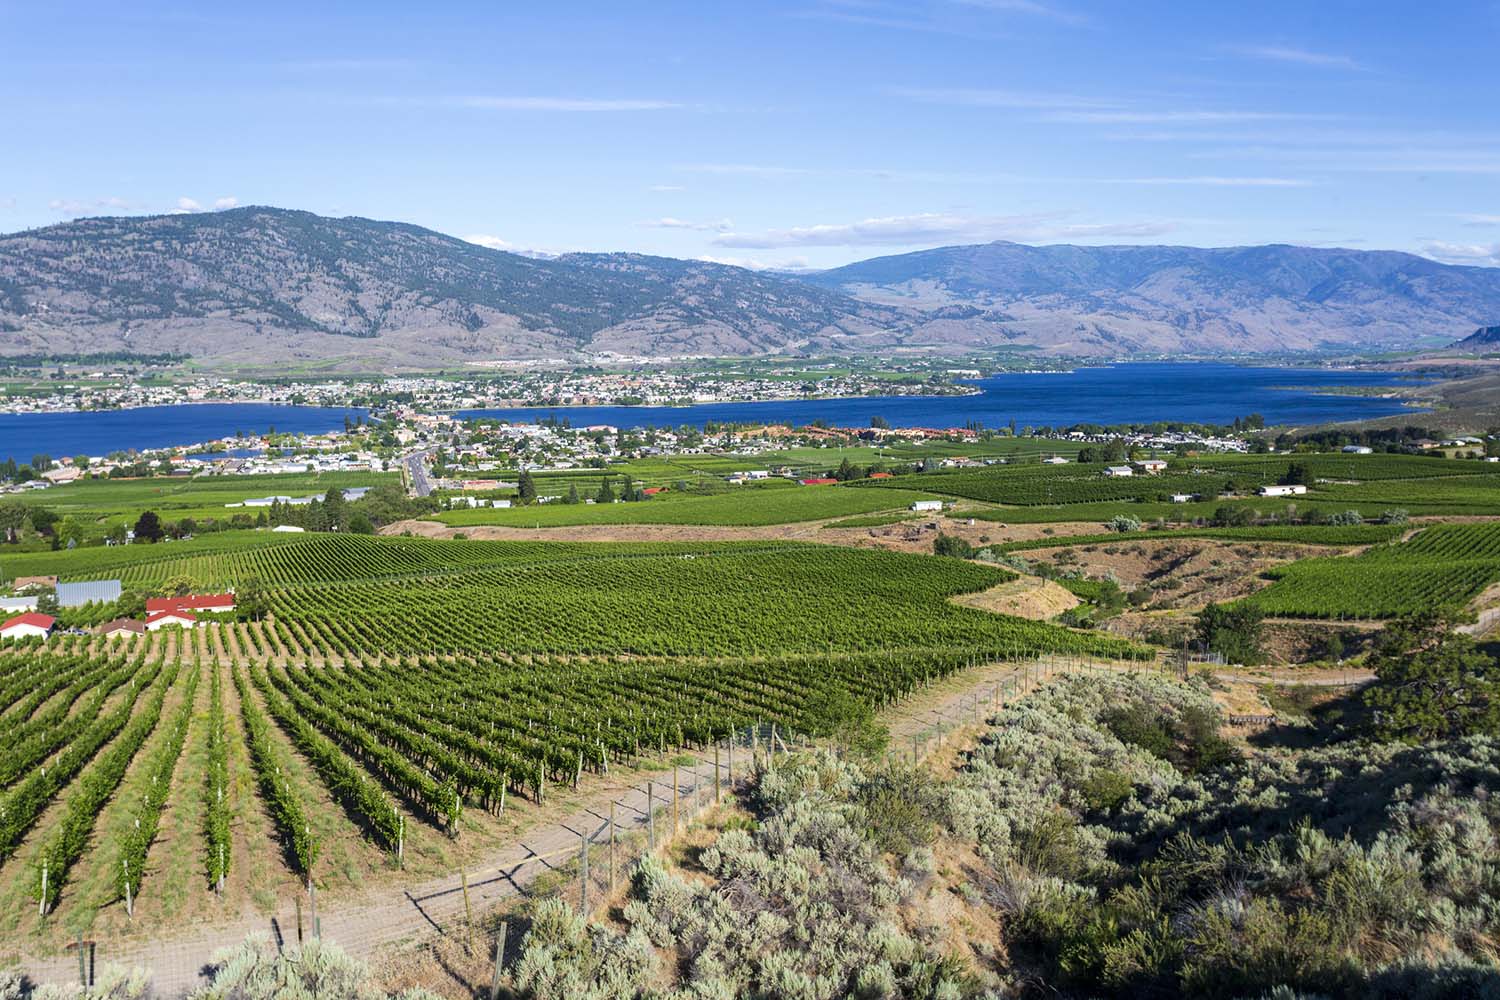 Vineyards, mountains and a lake form a pleasant scene under a blue sky.